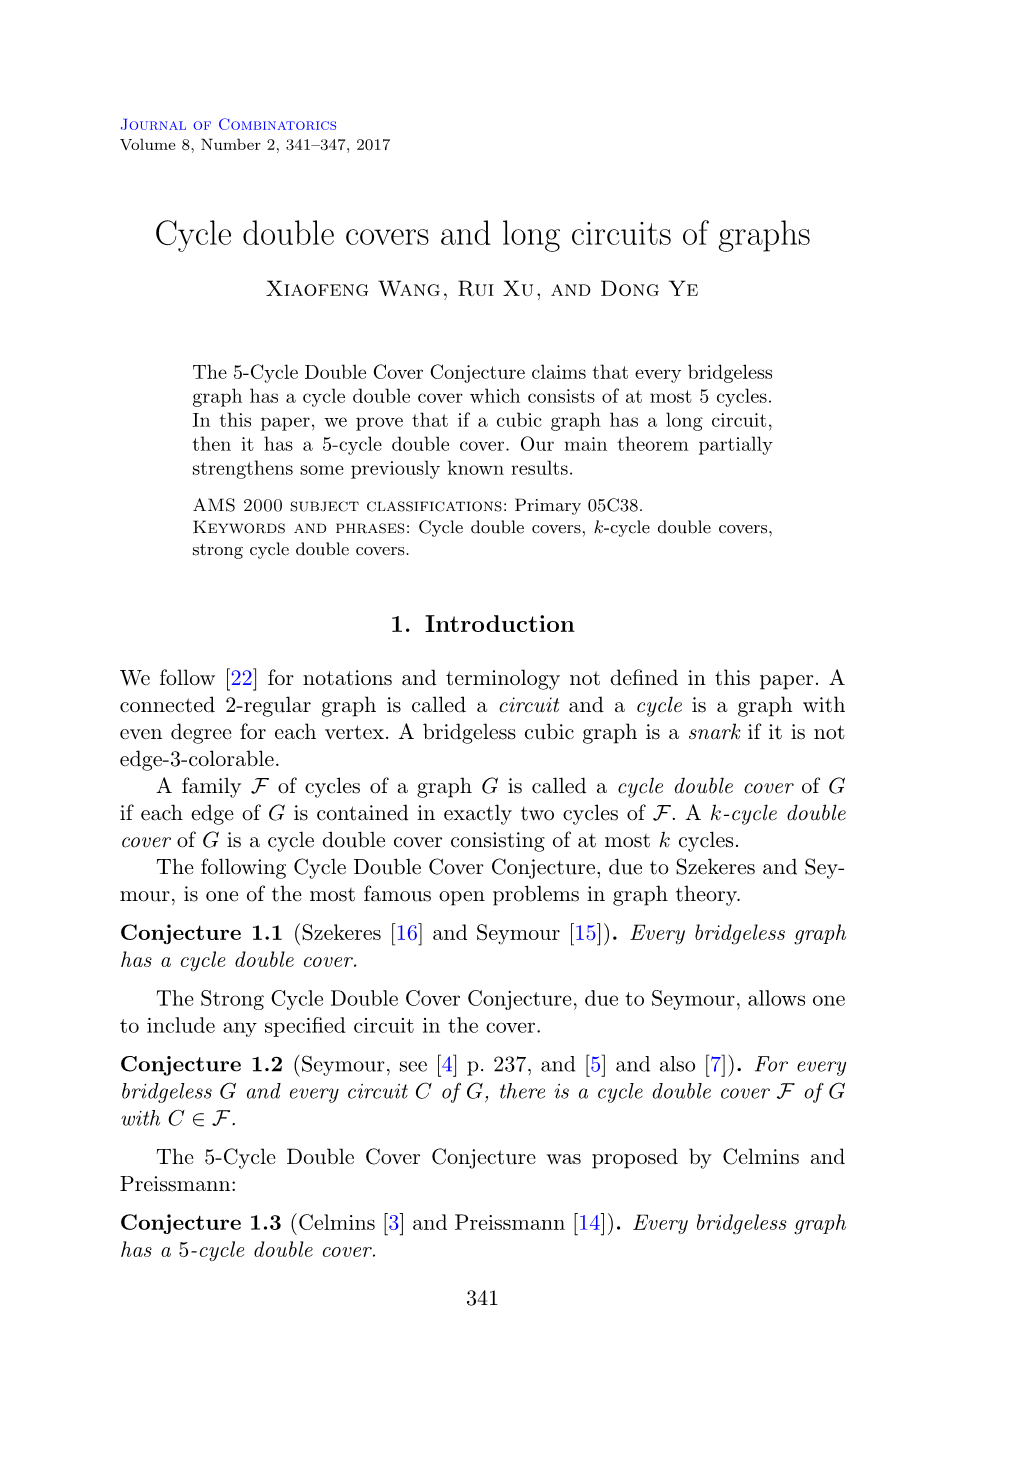 Cycle Double Covers and Long Circuits of Graphs